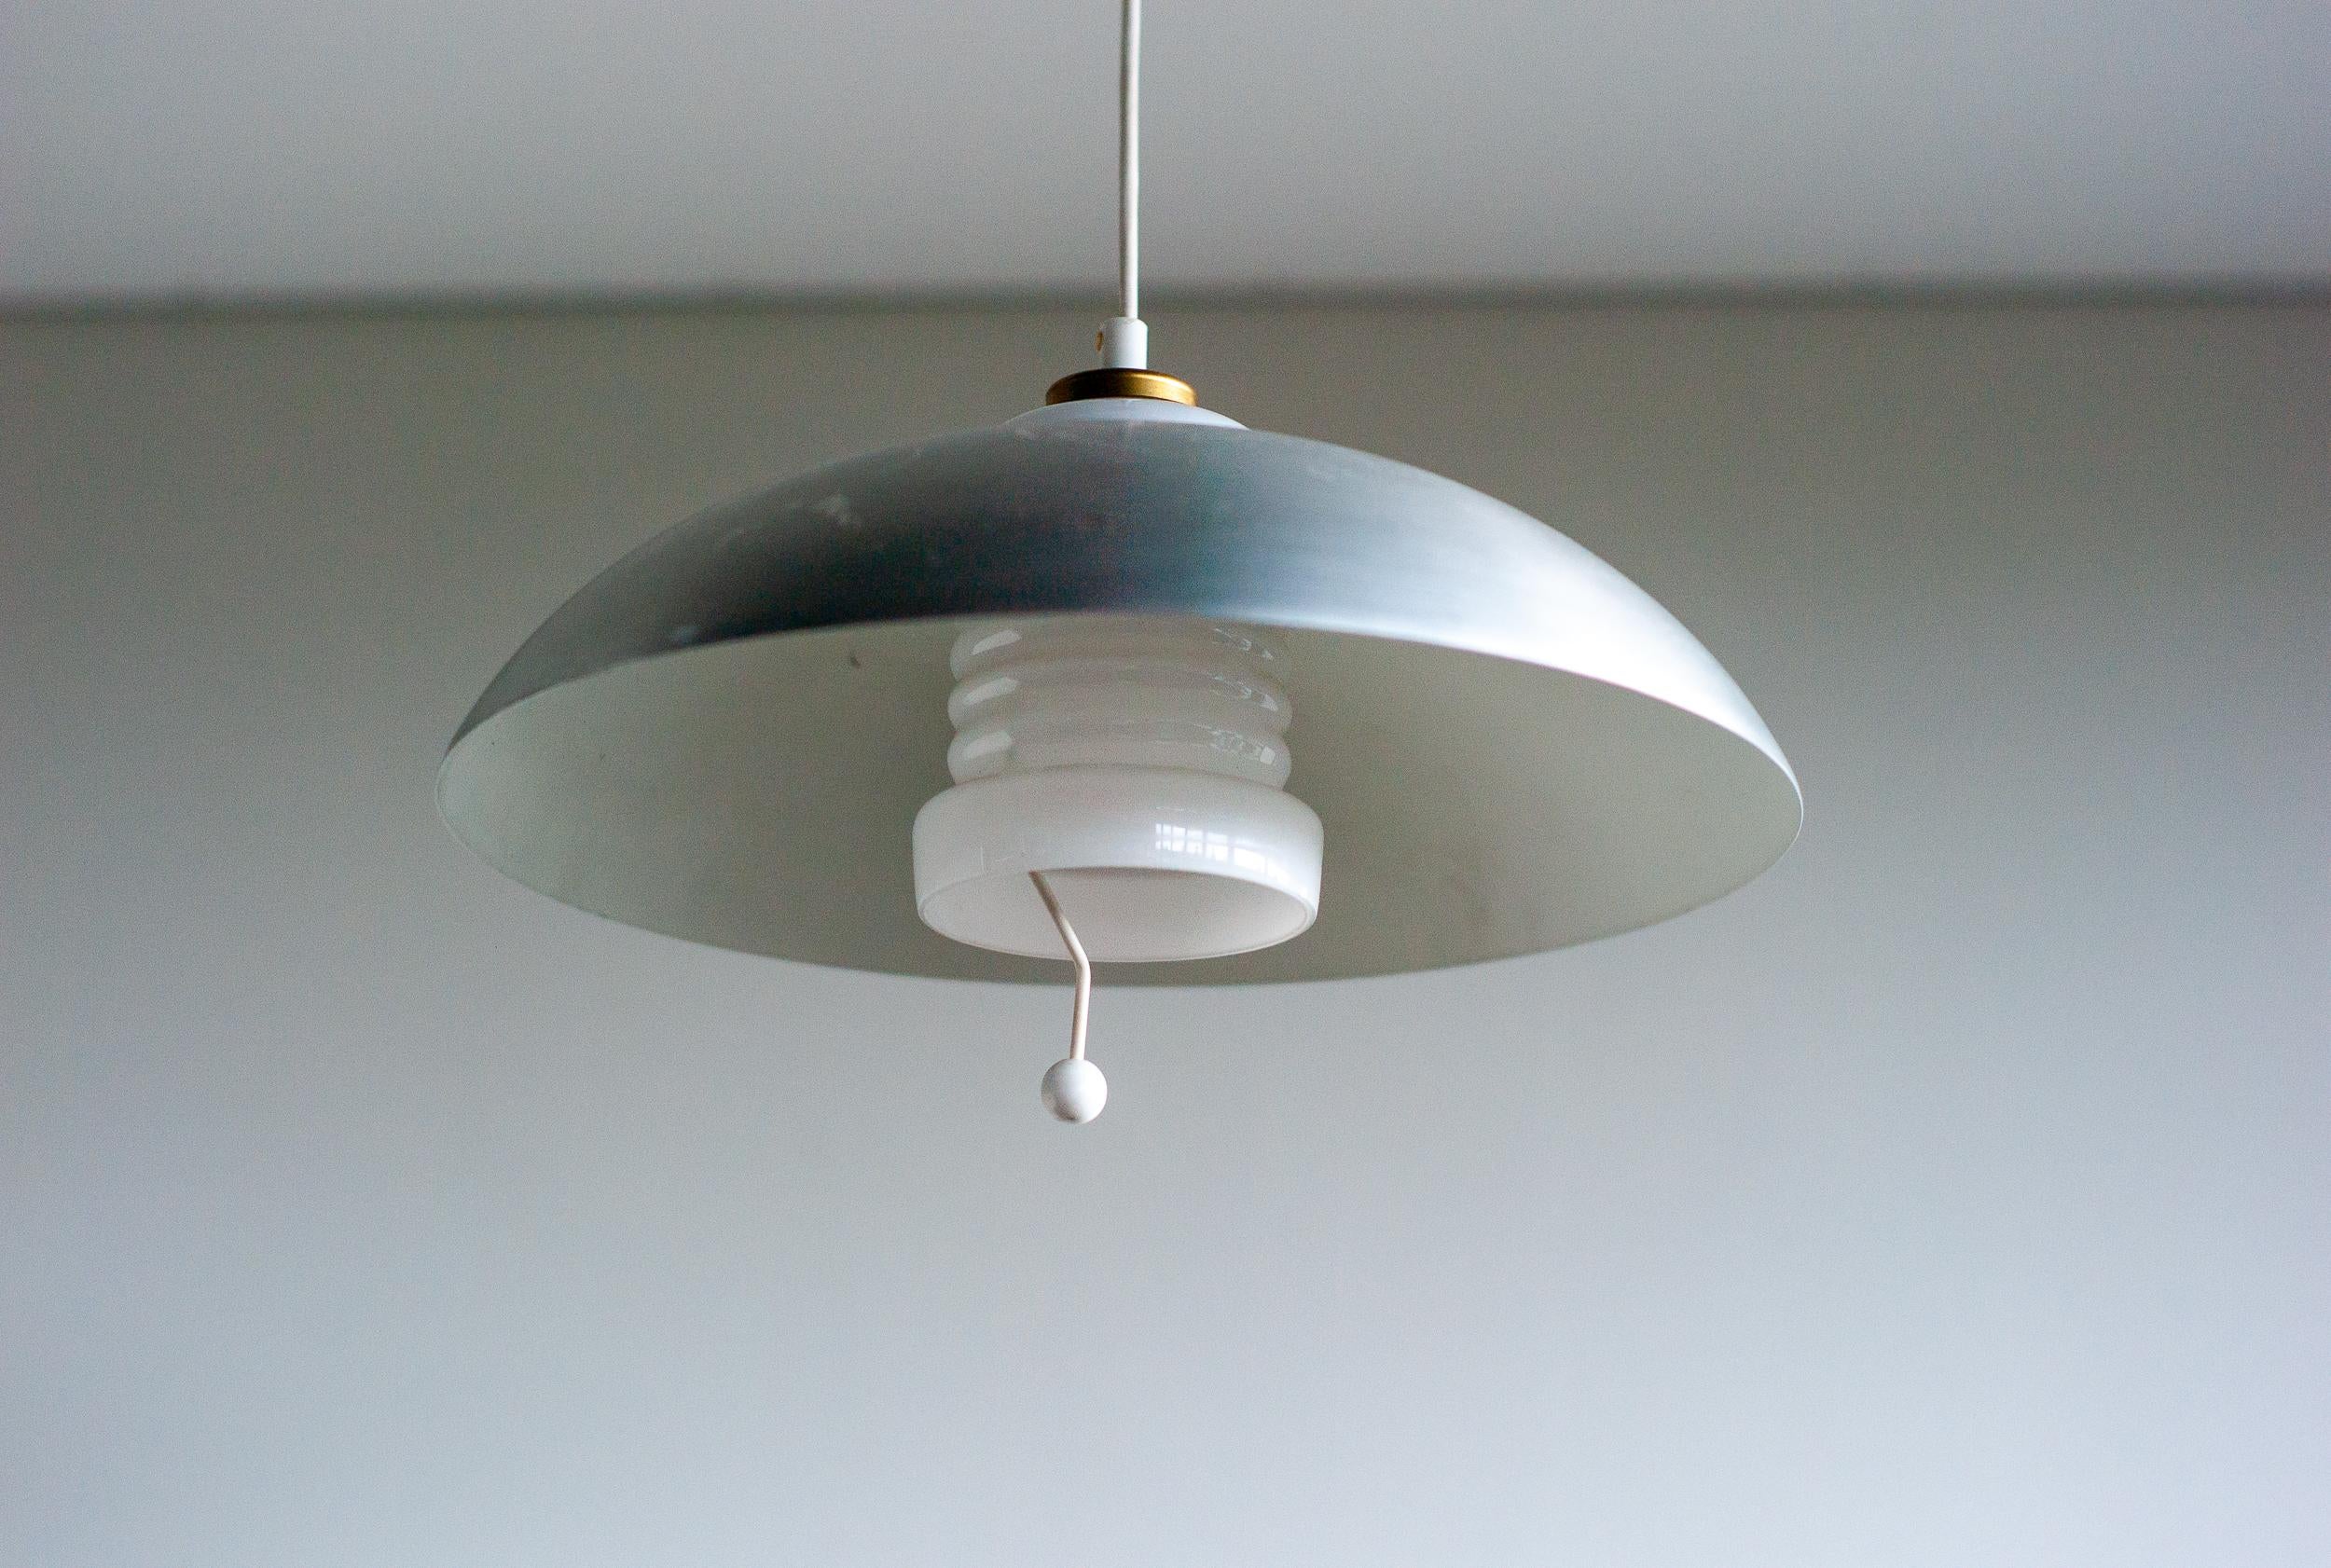 Beautiful adjustable Nordiska Kompaniet pendant made in 1950.
The shade and ceiling cap are made in polished aluminum. 
The counterweight is made of green porcelain.
The inside shade is made of white glass. Height is variable. 
Marked NK